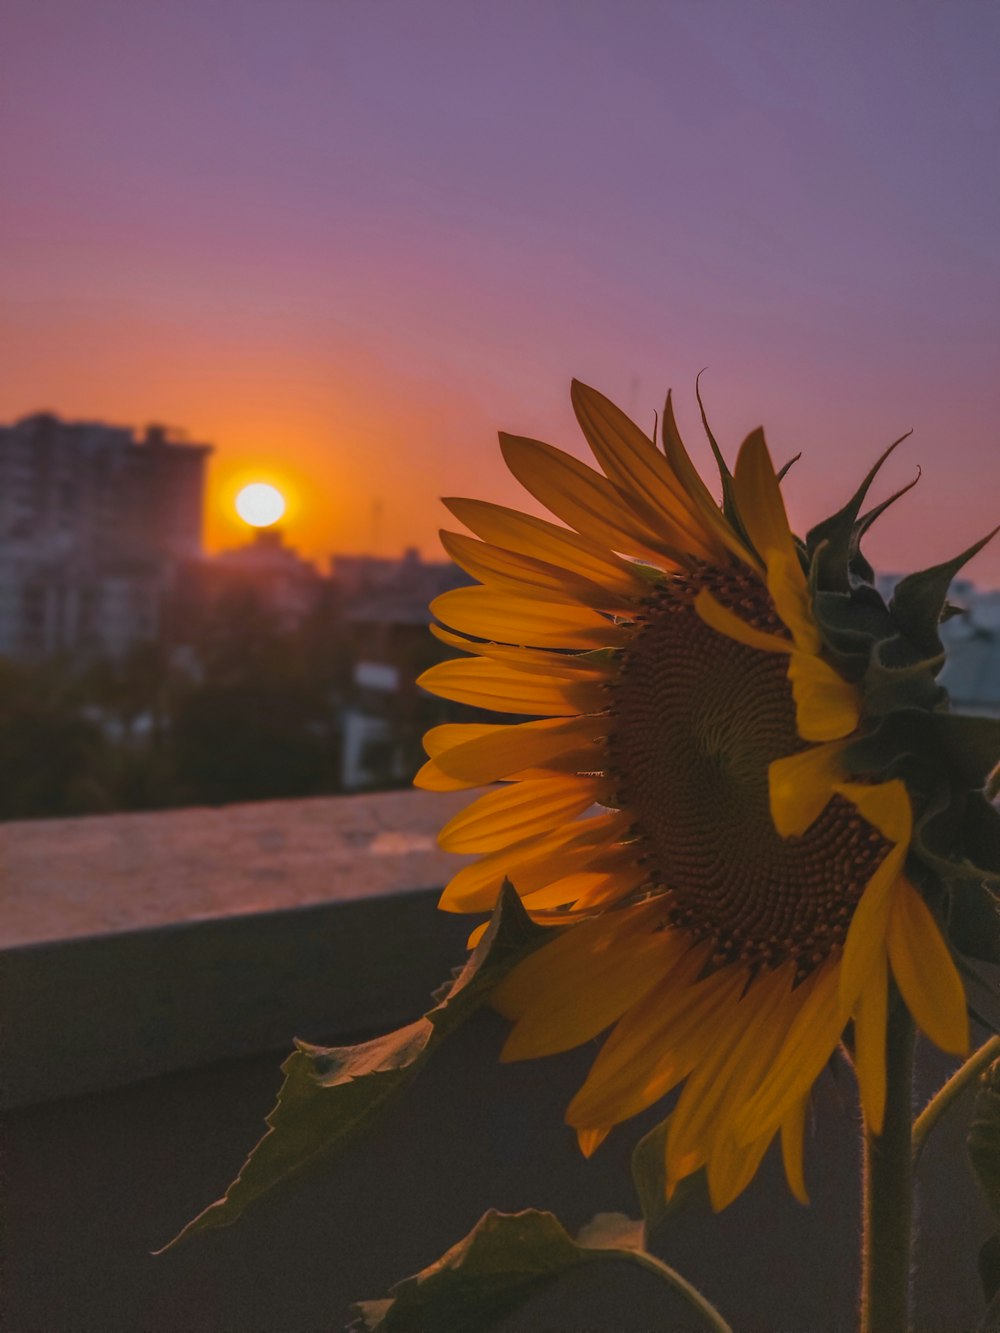 a sunflower in the foreground with a city in the background